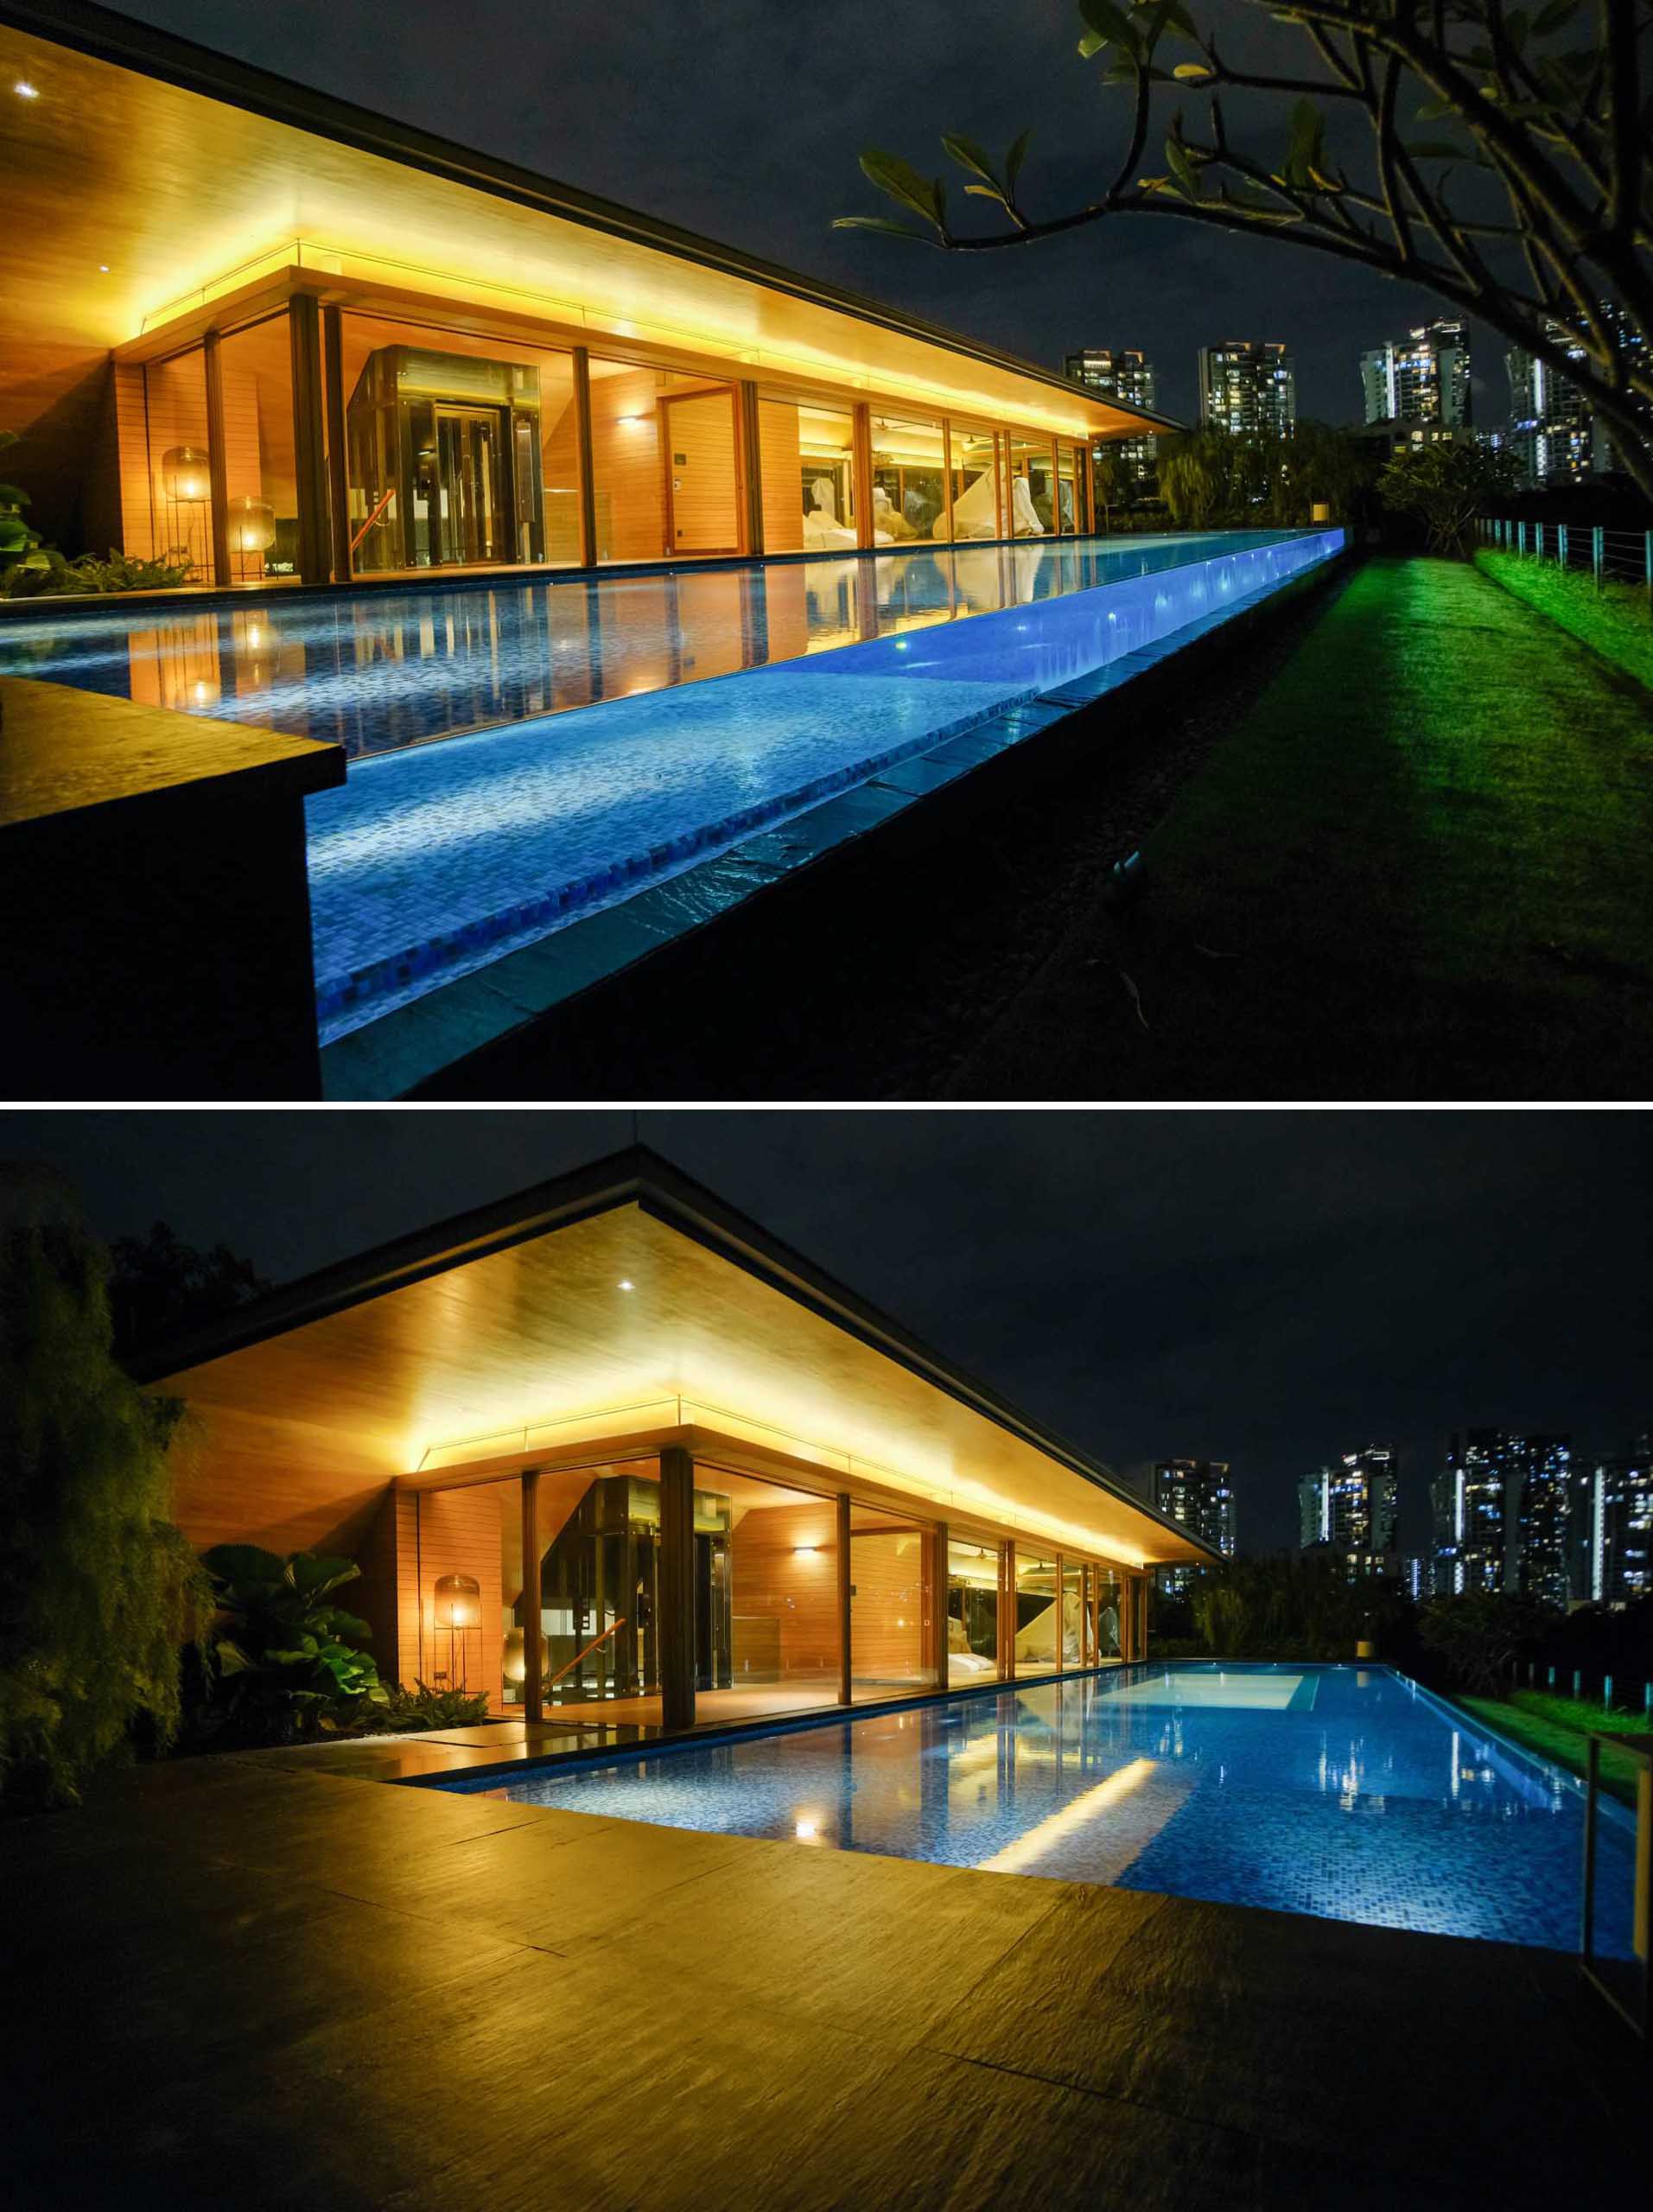 At night, hidden lighting highlights the architectural details of the home, and showcases the see-through wall of the swimming pool.